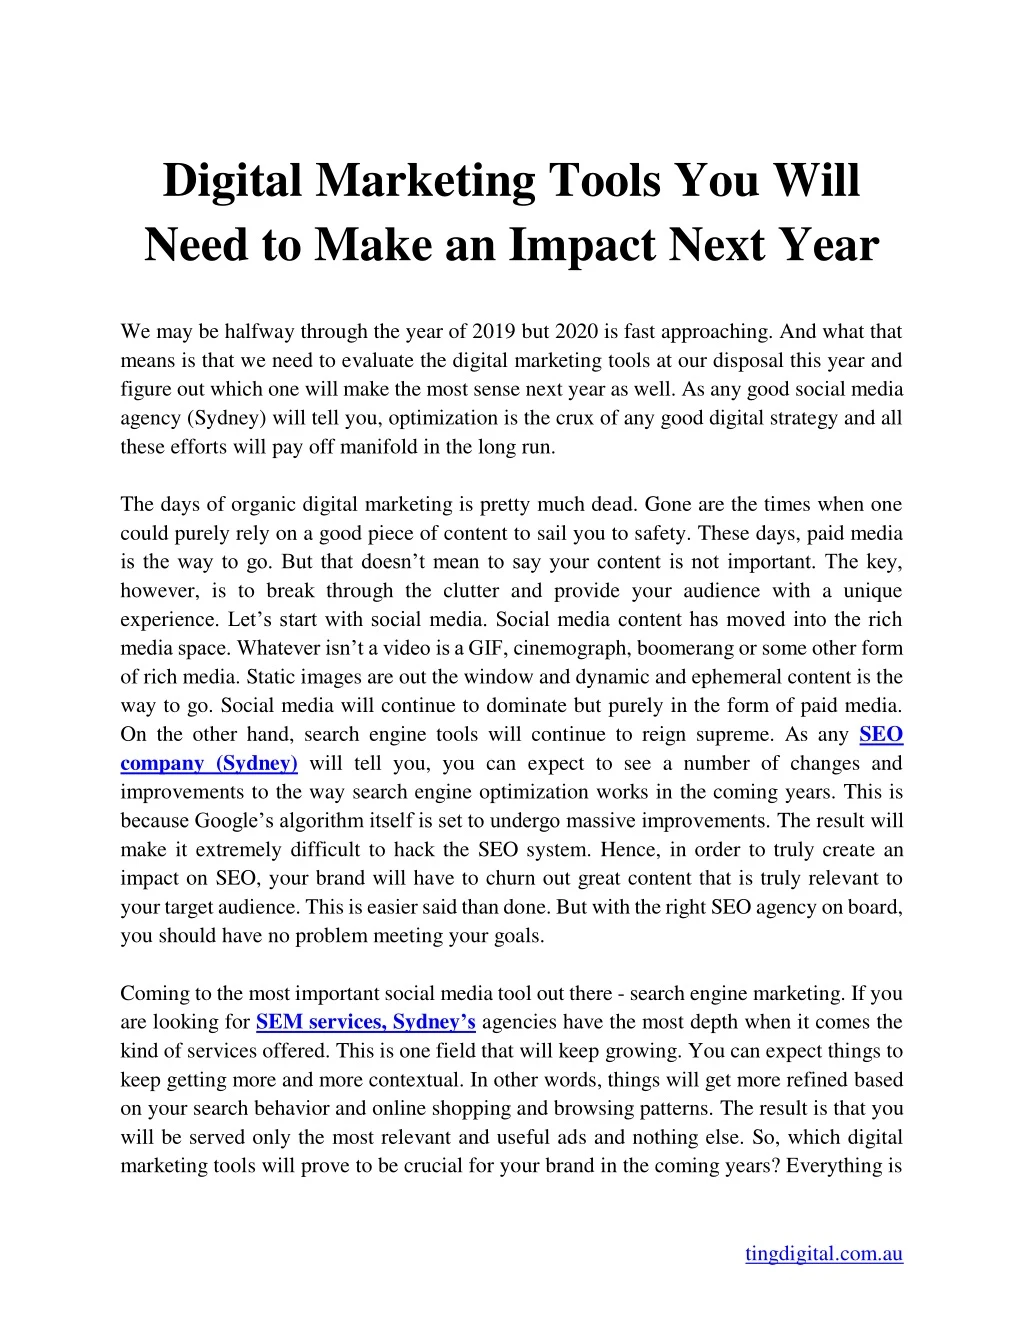 digital marketing tools you will need to make